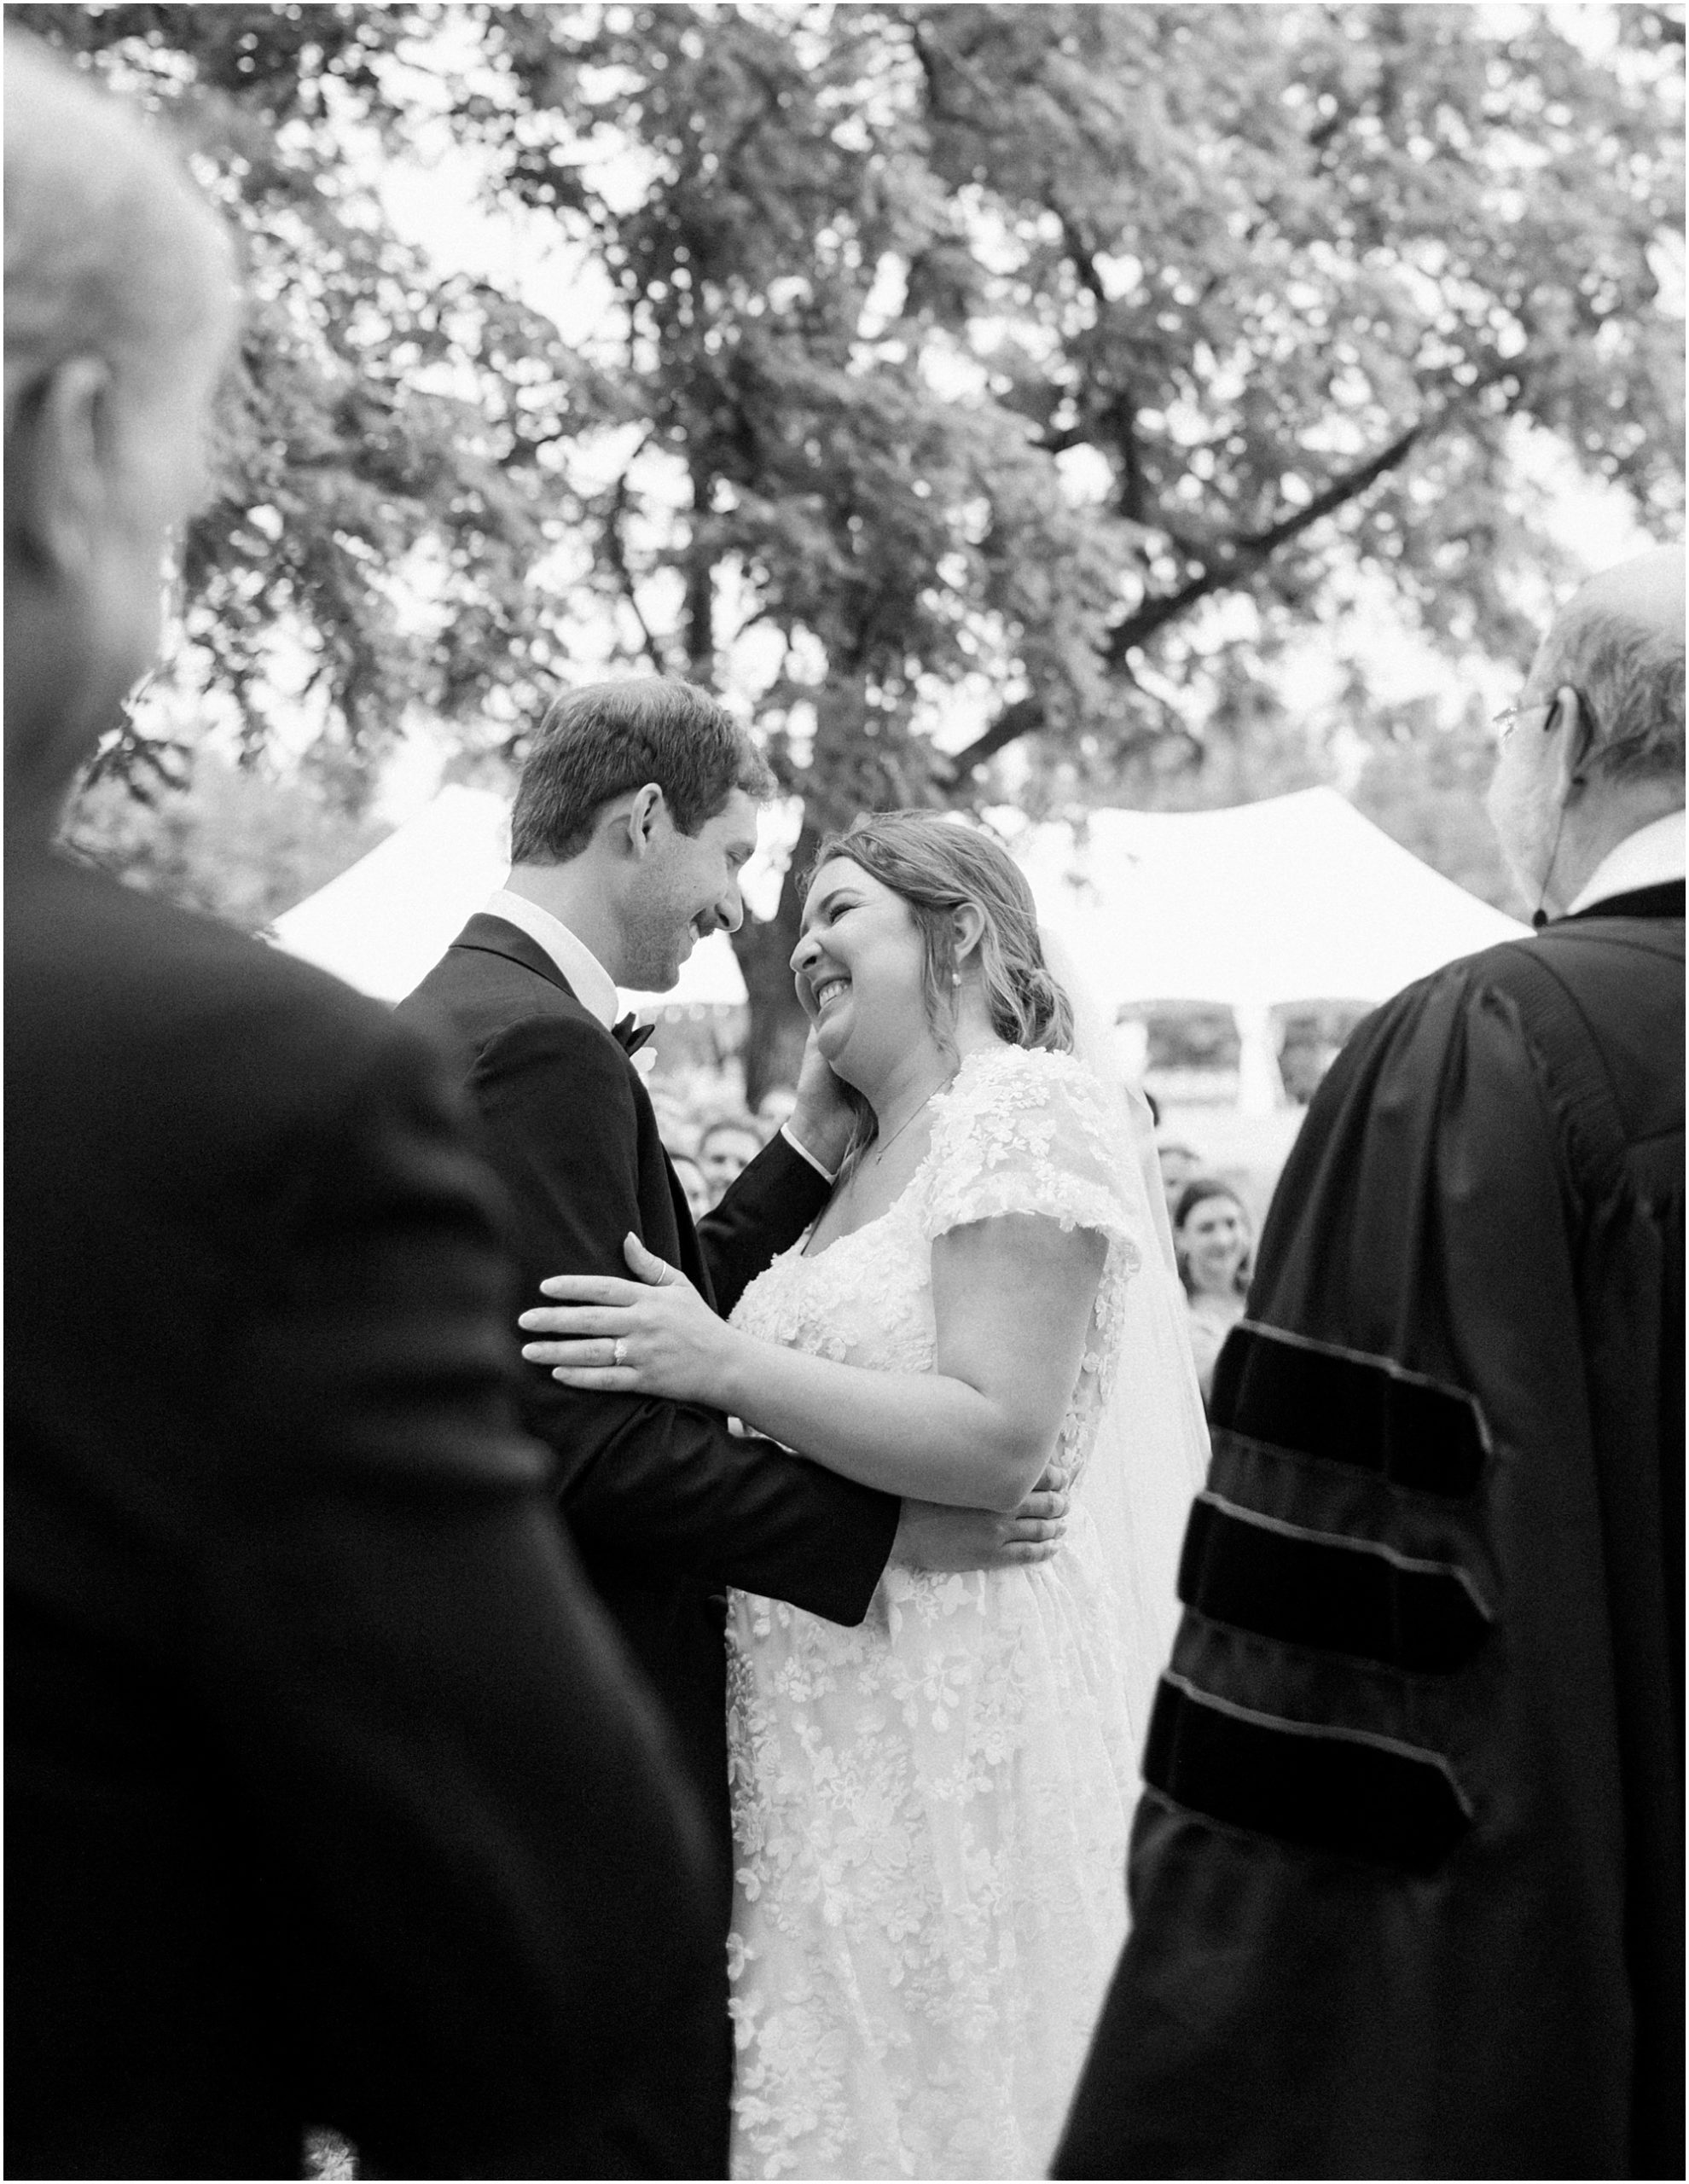 Bride and groom first kiss in black and white.